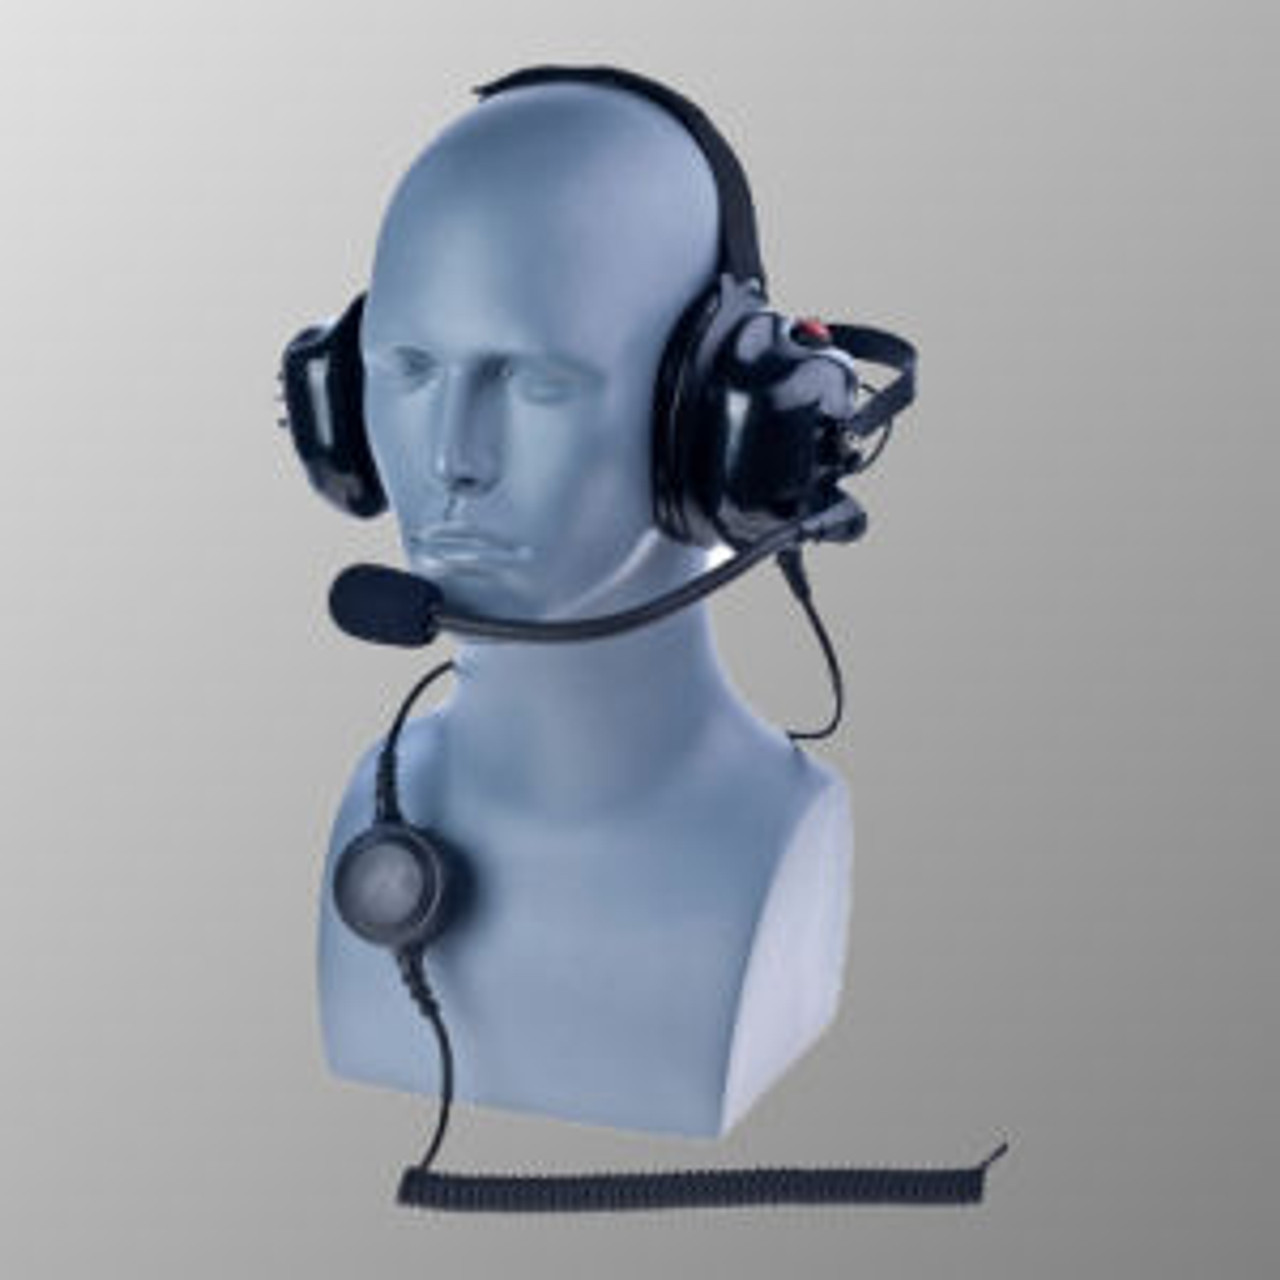 Kenwood TK-3400UP Noise Canceling Behind The Head Double Muff Headset